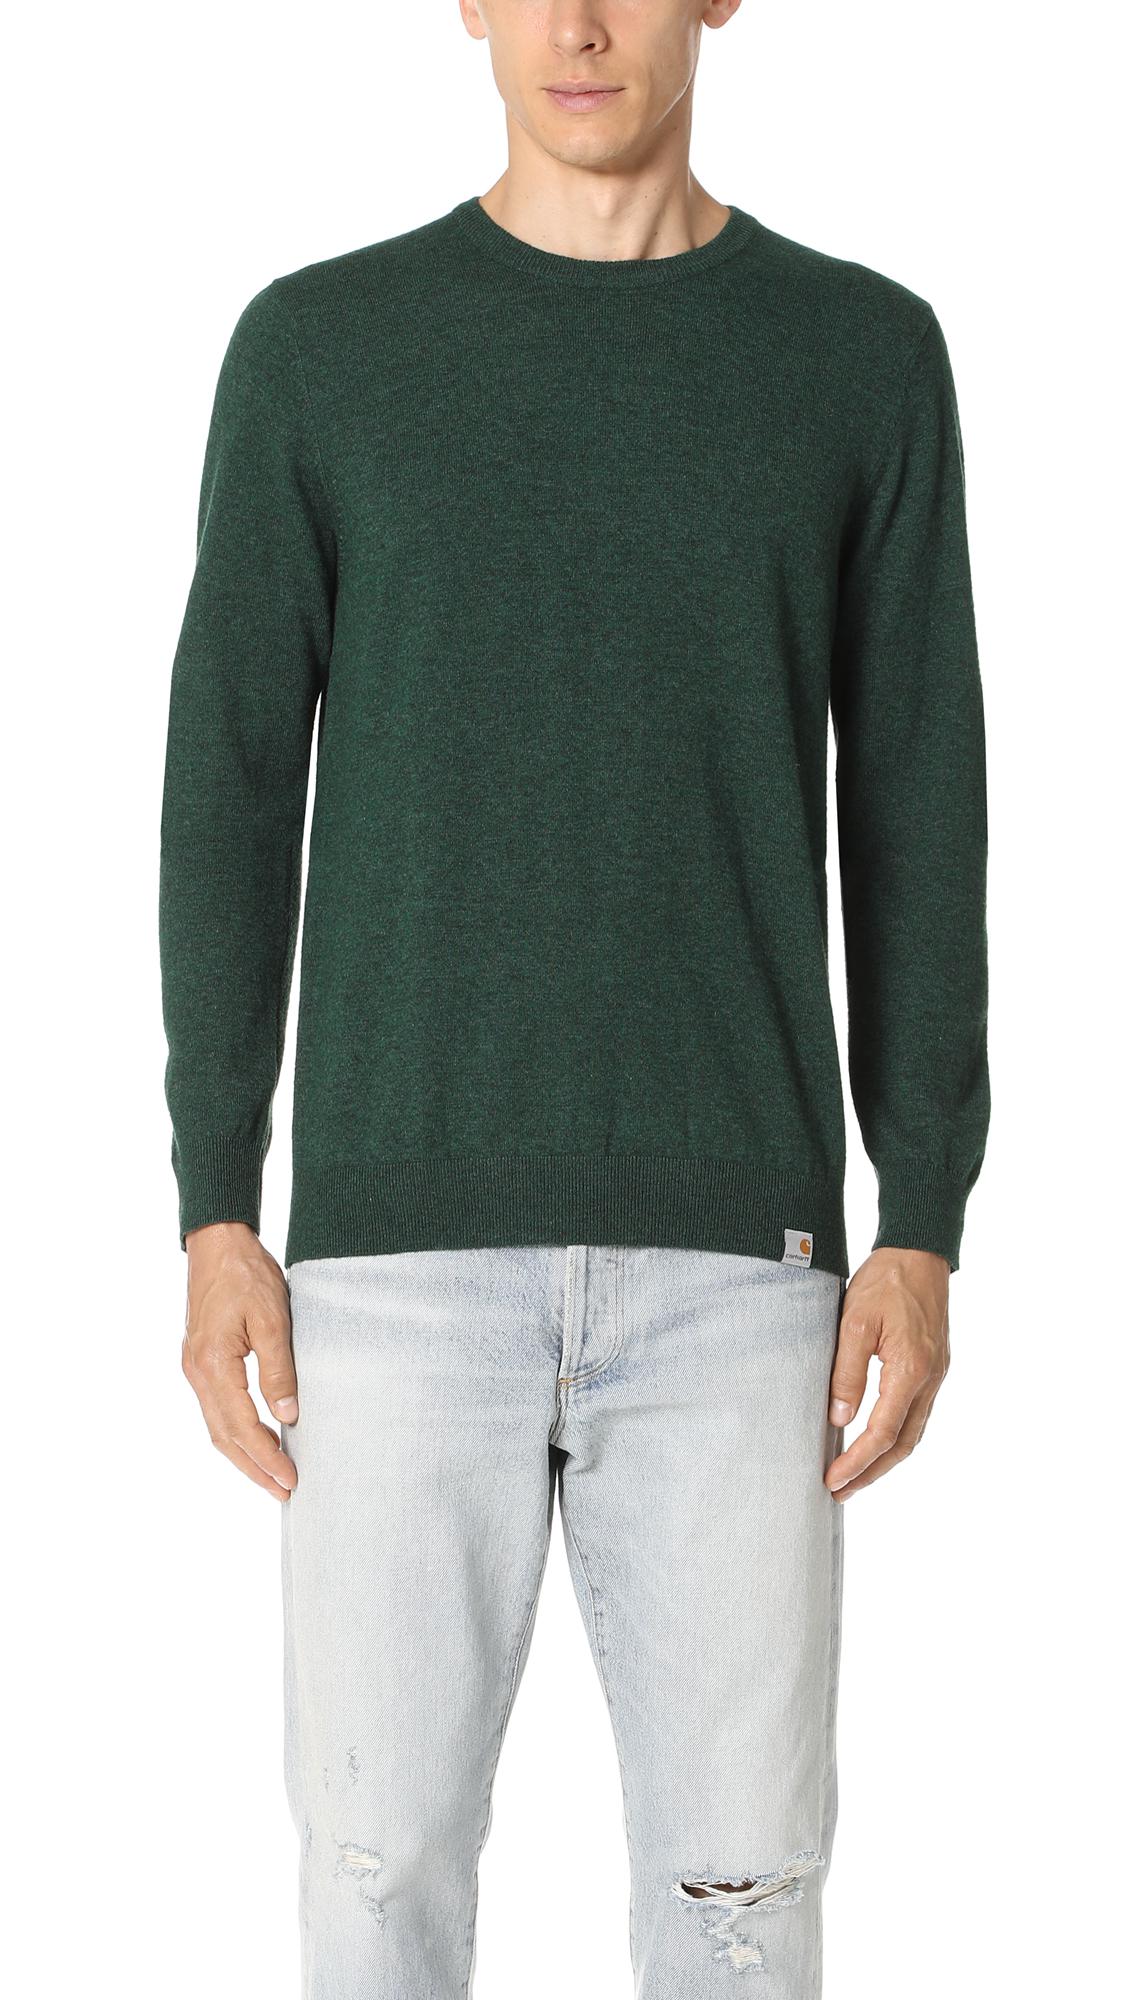 Carhartt WIP Synthetic Playoff Sweater in Green for Men - Lyst